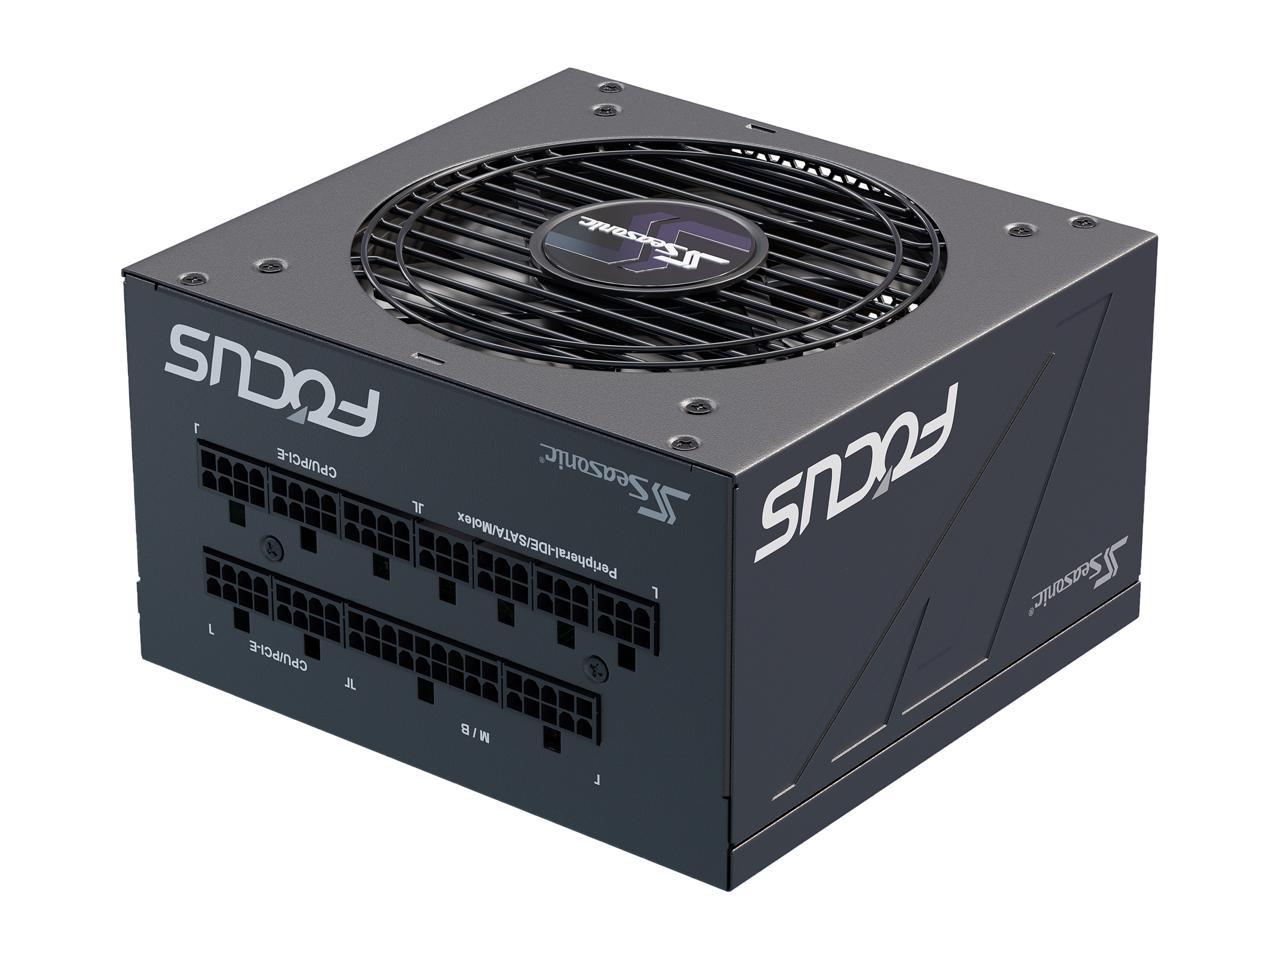 Seasonic FOCUS GX-750, 750W 80+ Gold, Full-Modular, Fan Control in Fanless, Silent, and Cooling Mode, 10 Year Warranty, Perfect Power Supply for Gaming and Various Application, SSR-750FX.